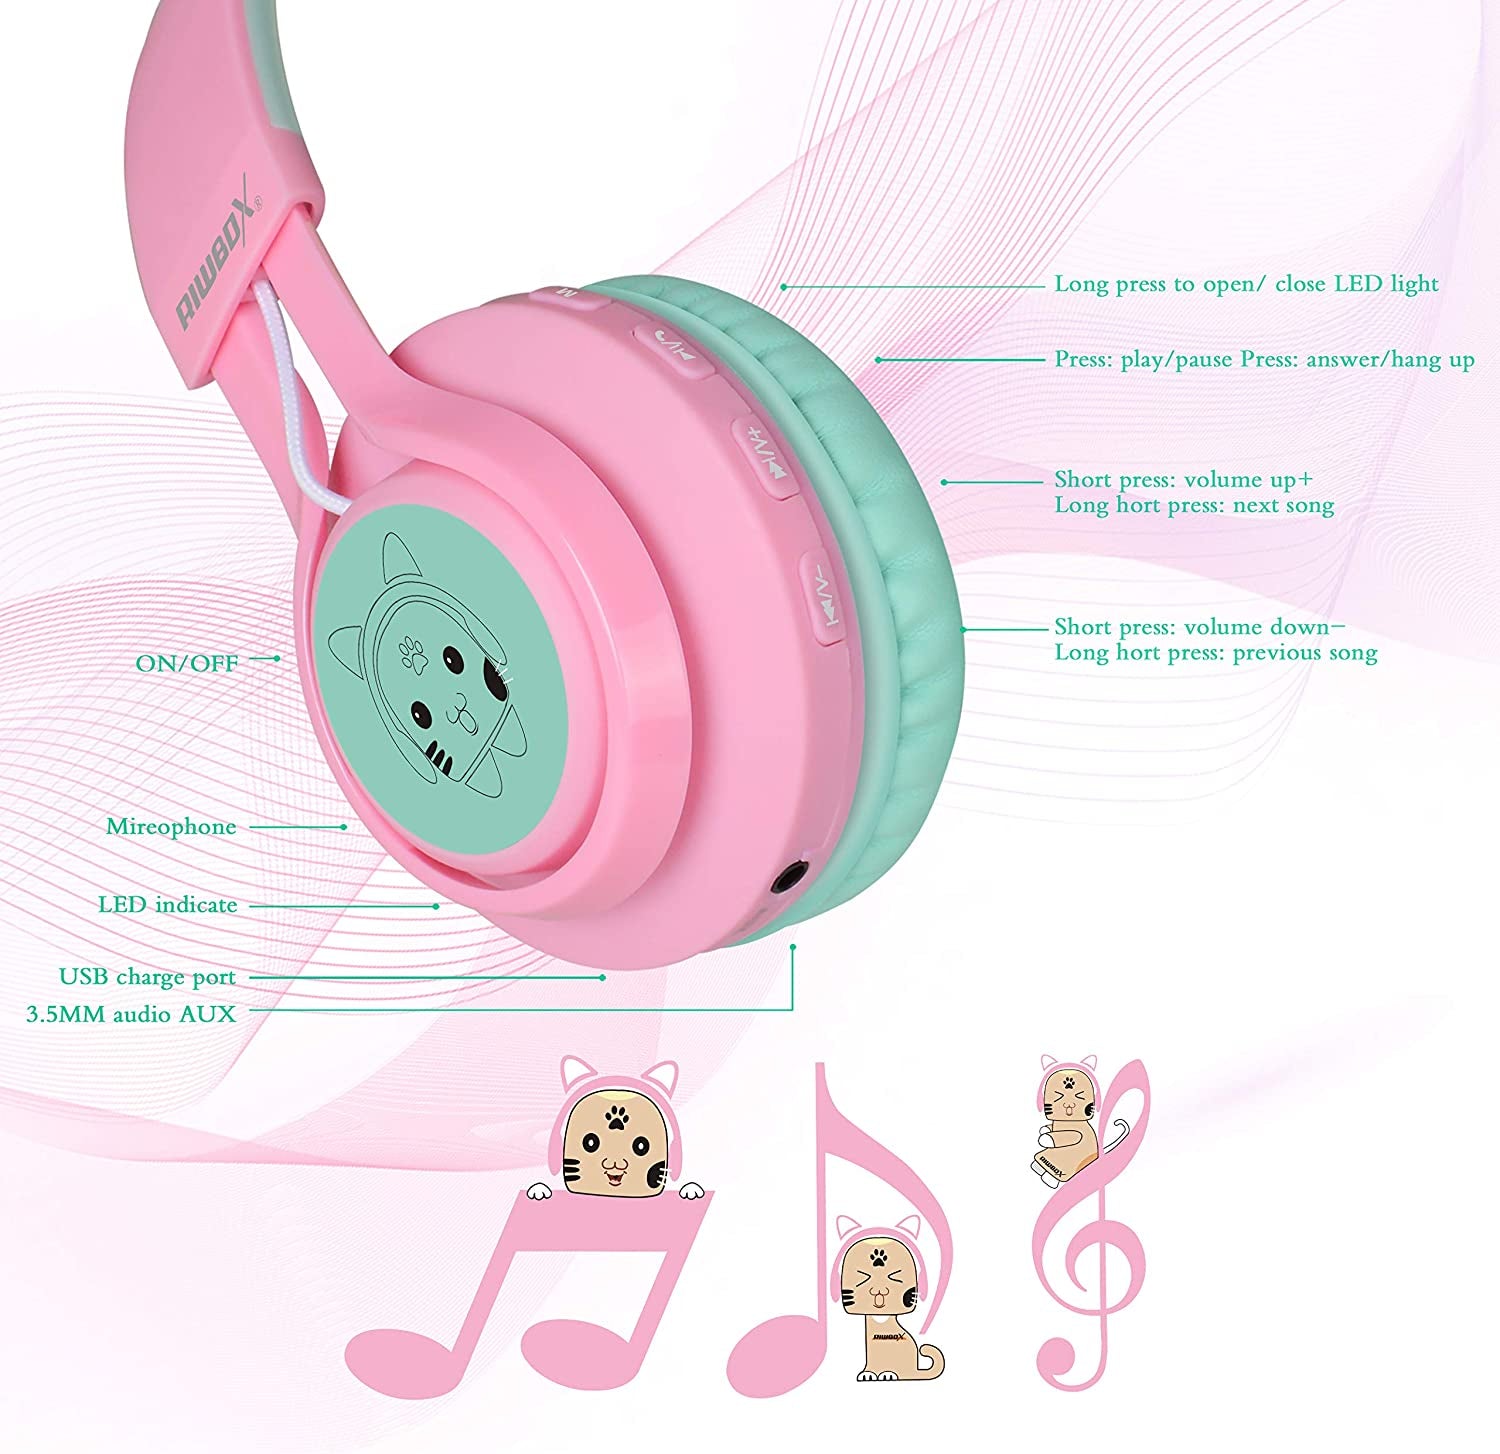 CT-7 Cat Ear Bluetooth Headphones, LED Light up Bluetooth Wireless over Ear Headphones with Microphone and Volume Control for Travel/School/Smartphones/Laptop/Pc/Tv